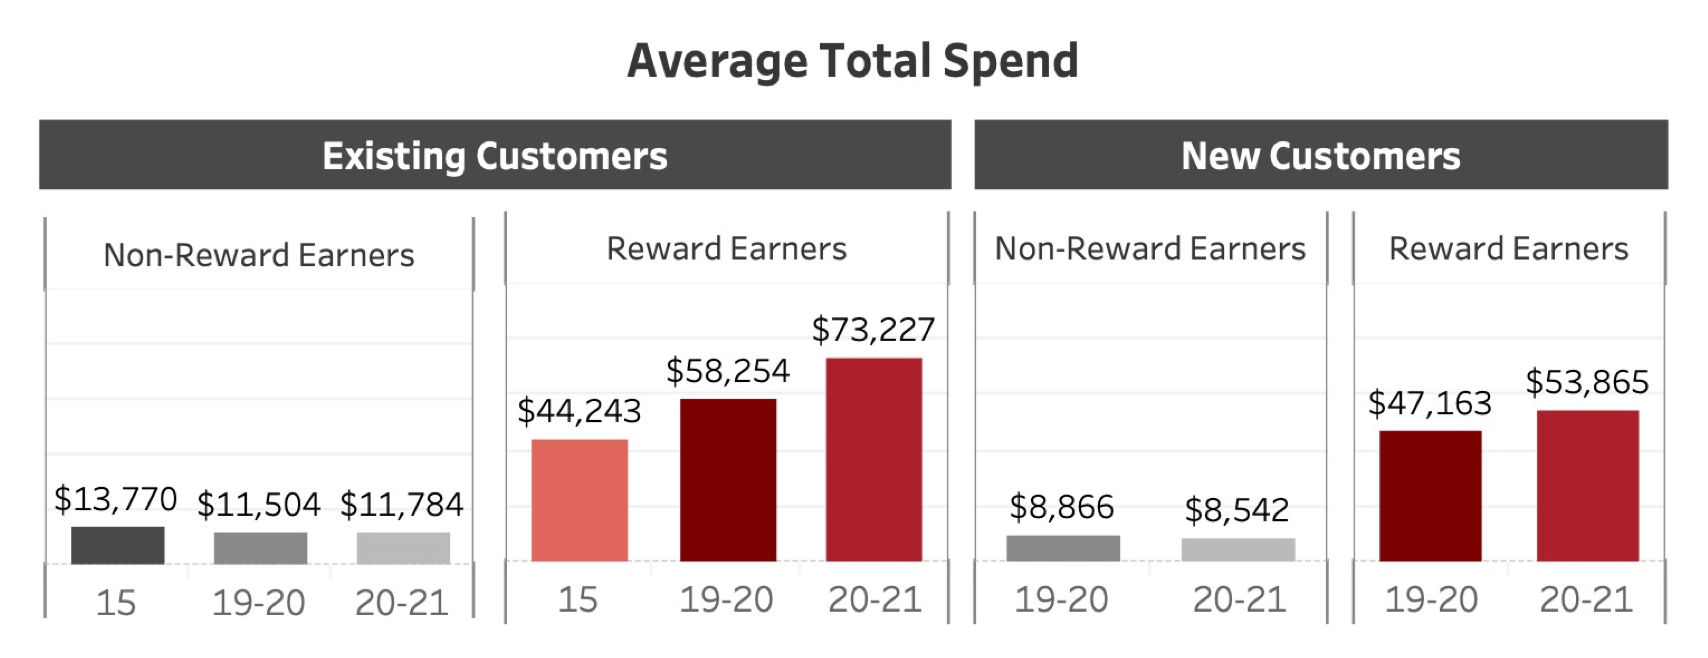 A graph showing the average total spend of existing customers and new customers